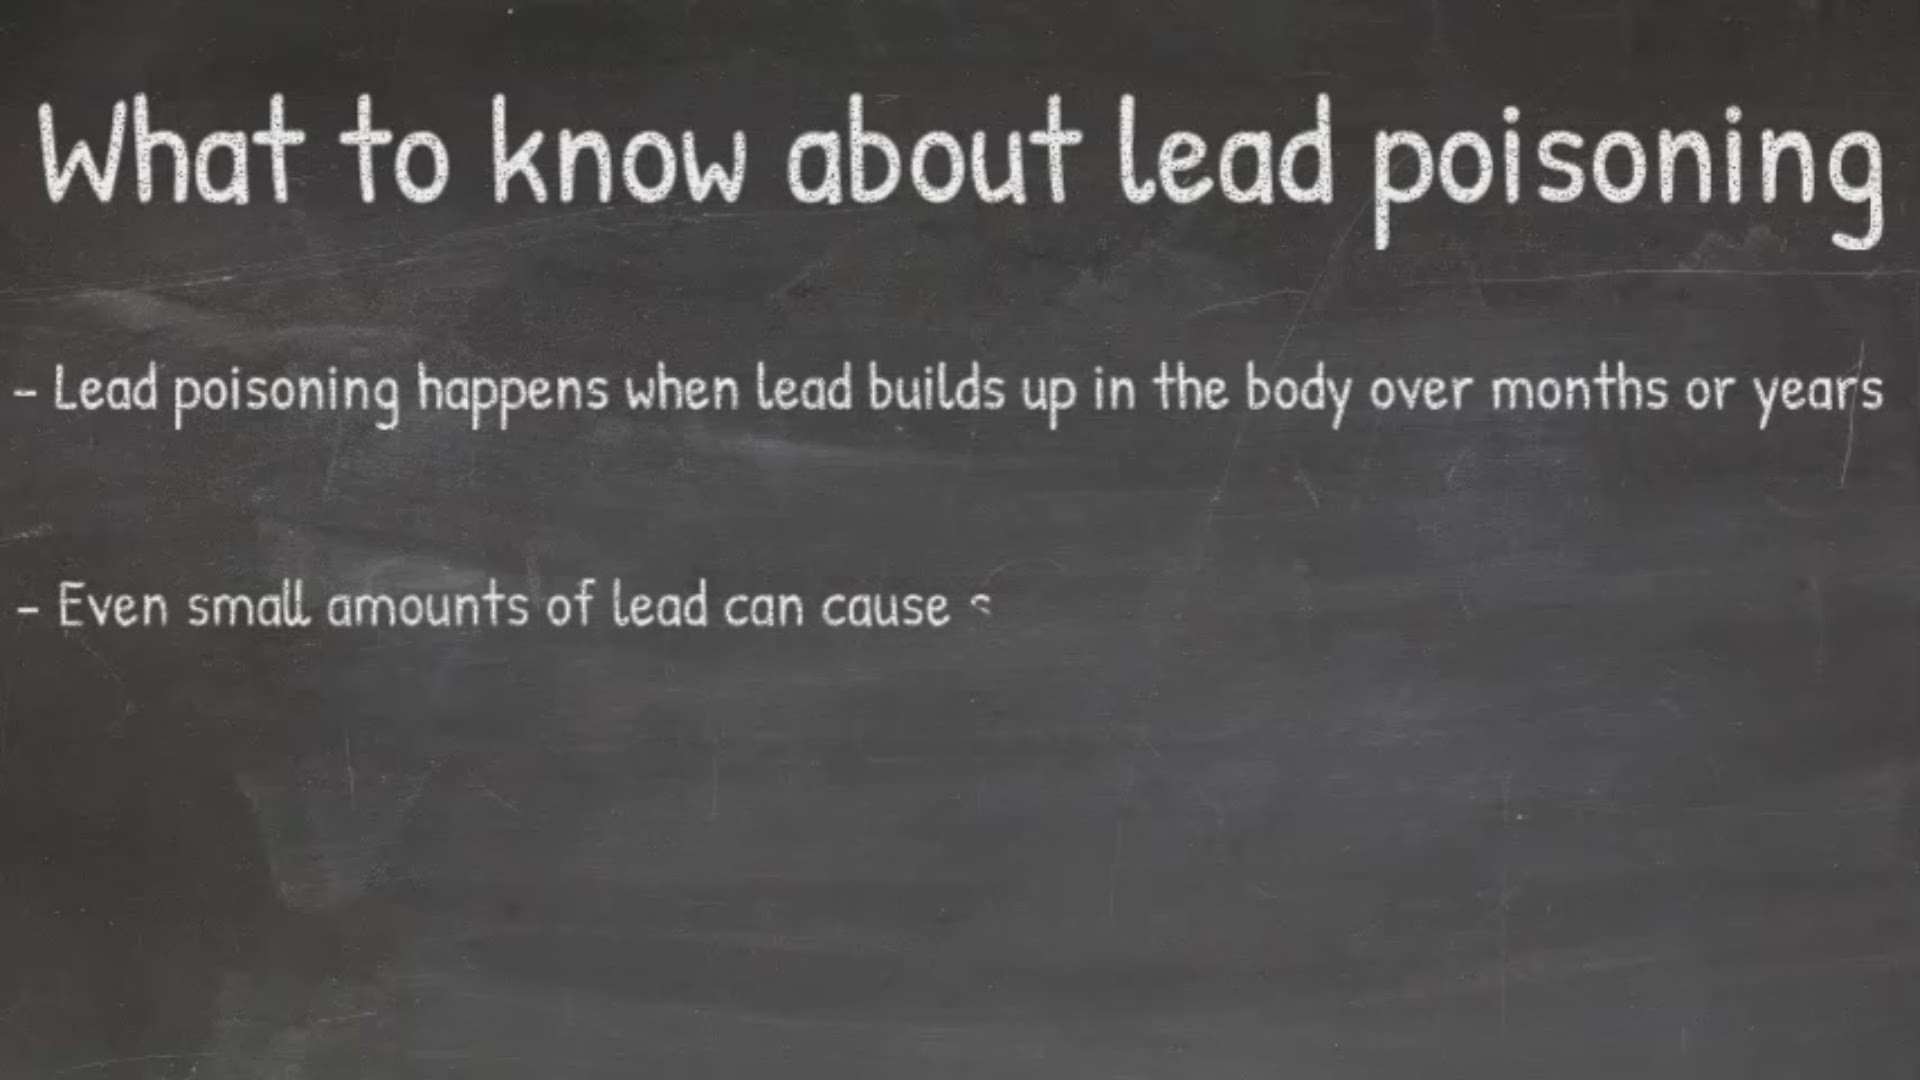 Symptoms and prevention methods of lead poisoning.